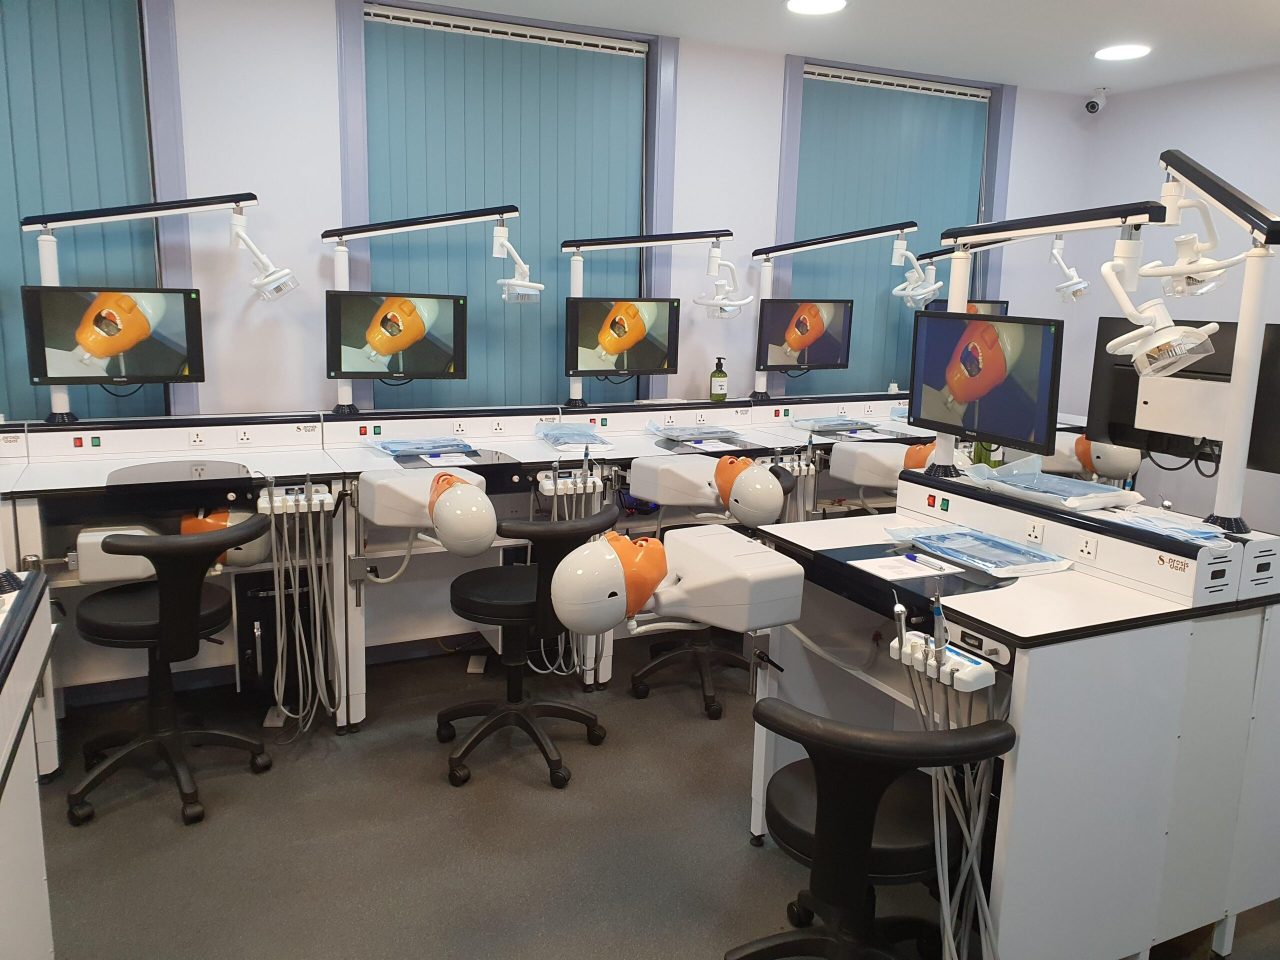 North London dental practice expands training facilities